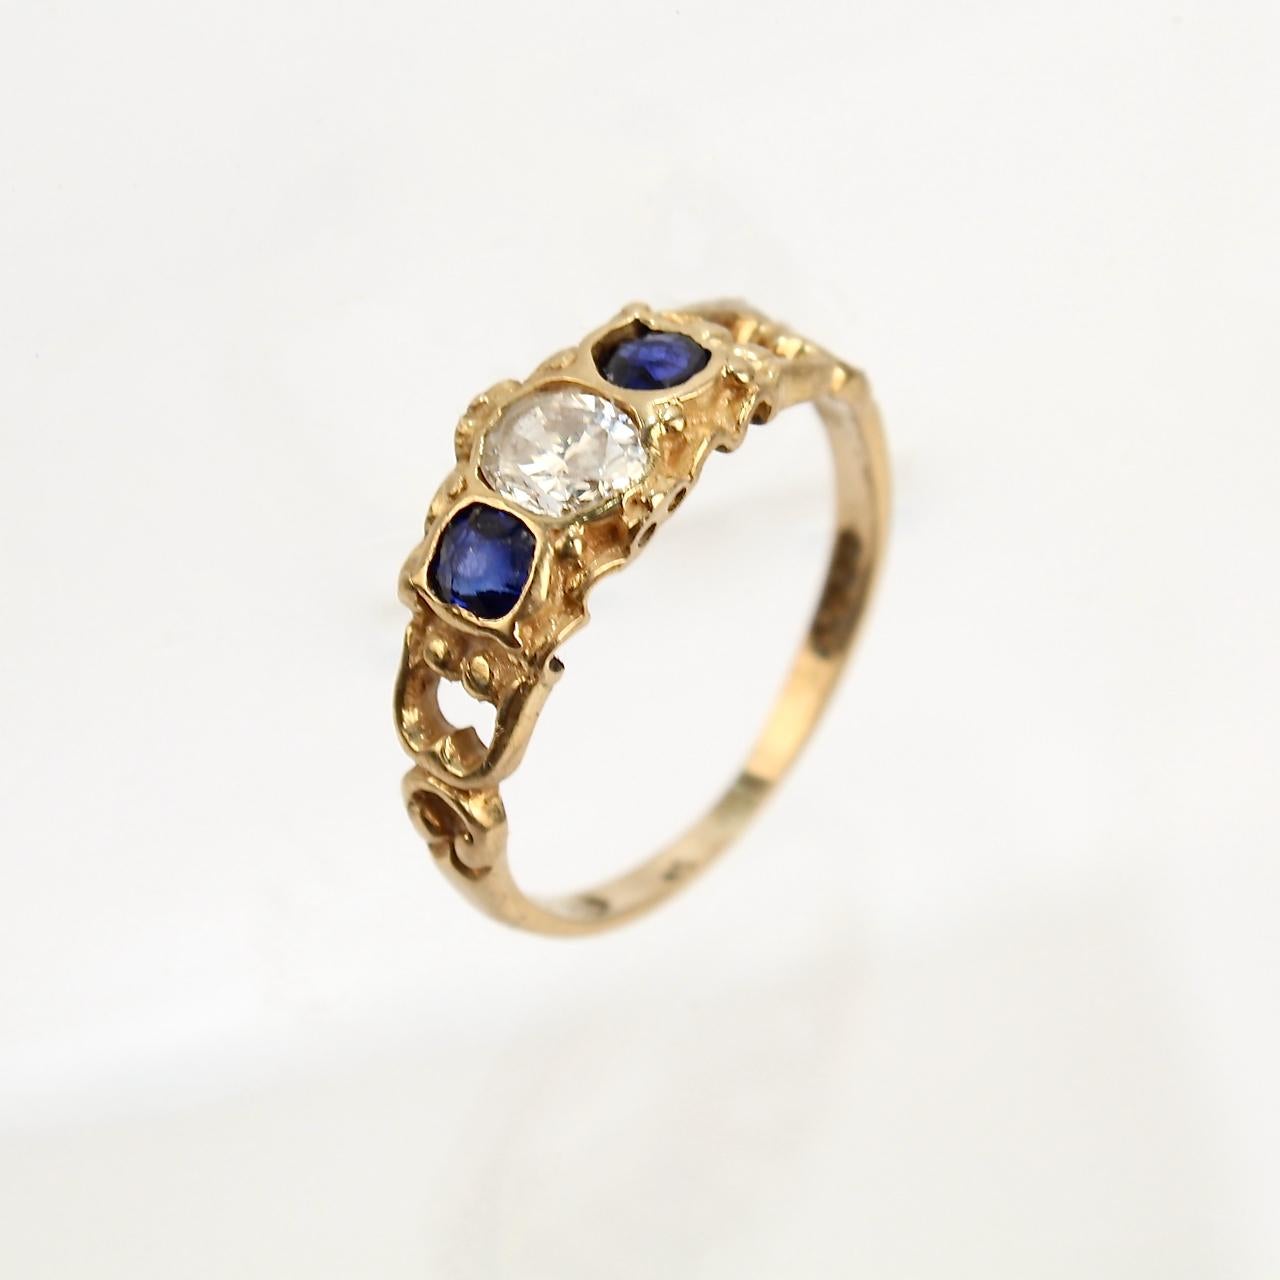 A very fine Victorian style English 18K gold, sapphire, & diamond ring. 

With a faceted oval diamond bezel set between two dark blue sapphires. The ring has a beautiful matte finish to the gold around the stones. 

A wonderful ring!

Date:
20th